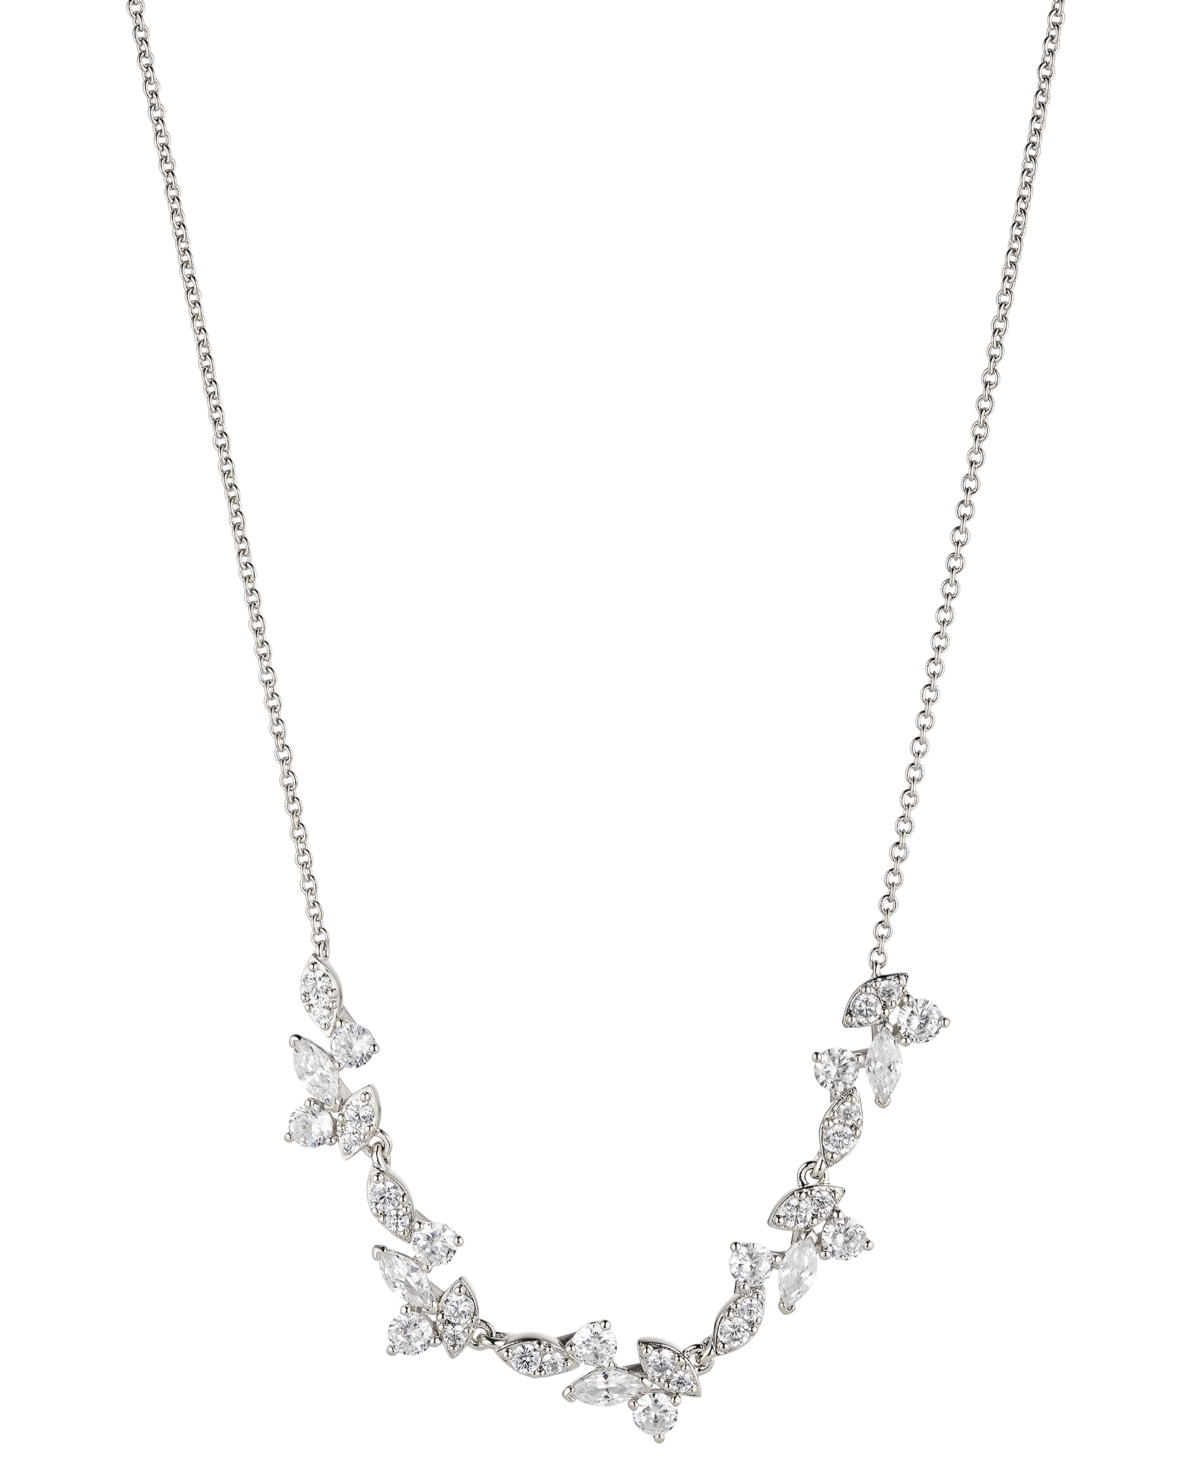 Silver-Tone Crystal Frontal Necklace, 16" + 2" extender, Created for Macy's - Silver